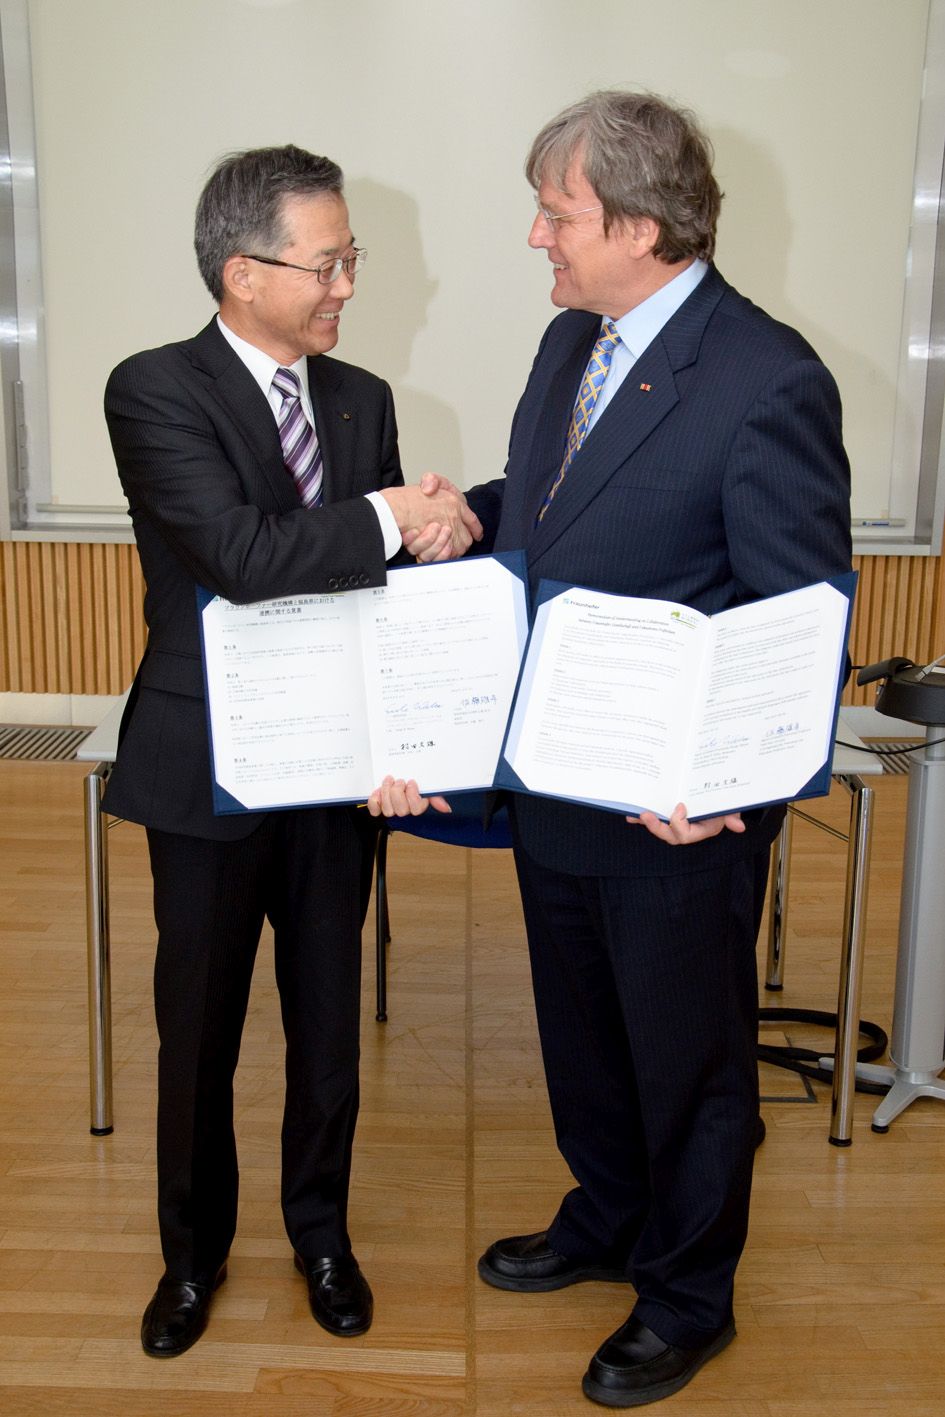 Fumio Murata, Vice Governor Fukushima Prefecture, Japan (left) and Prof. Eicke R. Weber, Director Fraunhofer ISE, after signing of Memorandum of Understanding 